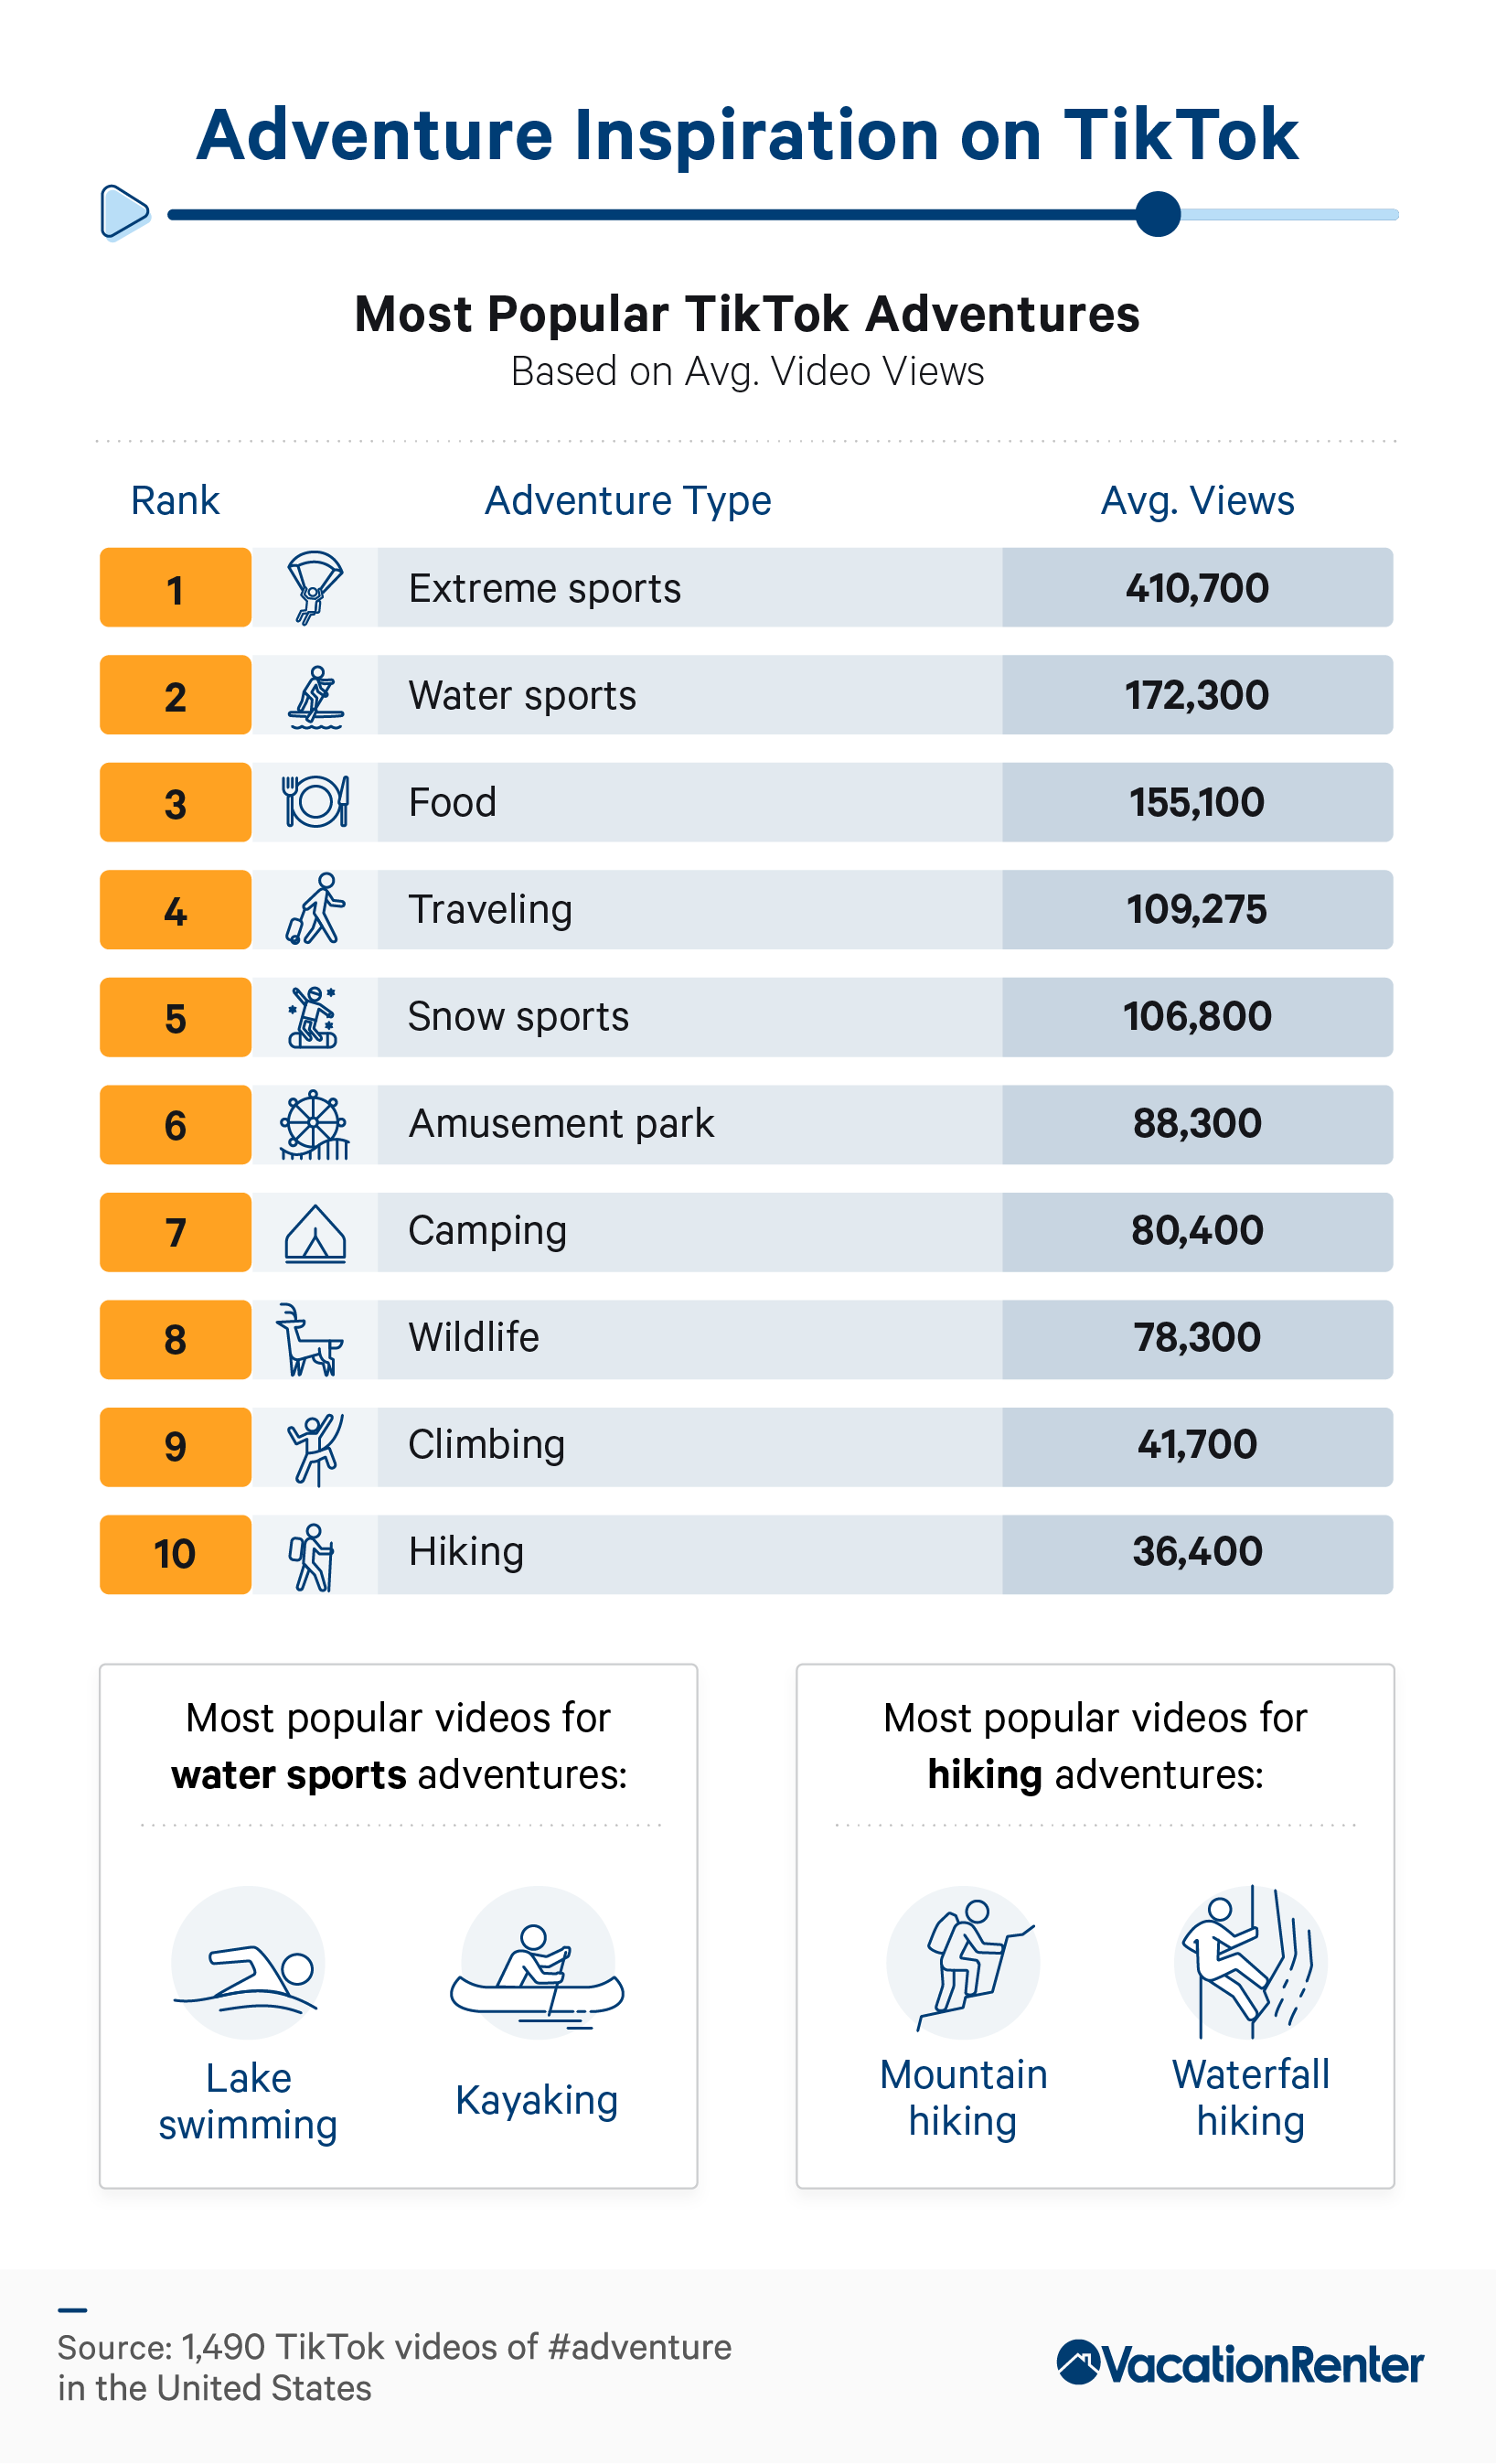 Ranking of types of adventurous activities by their social media engagement